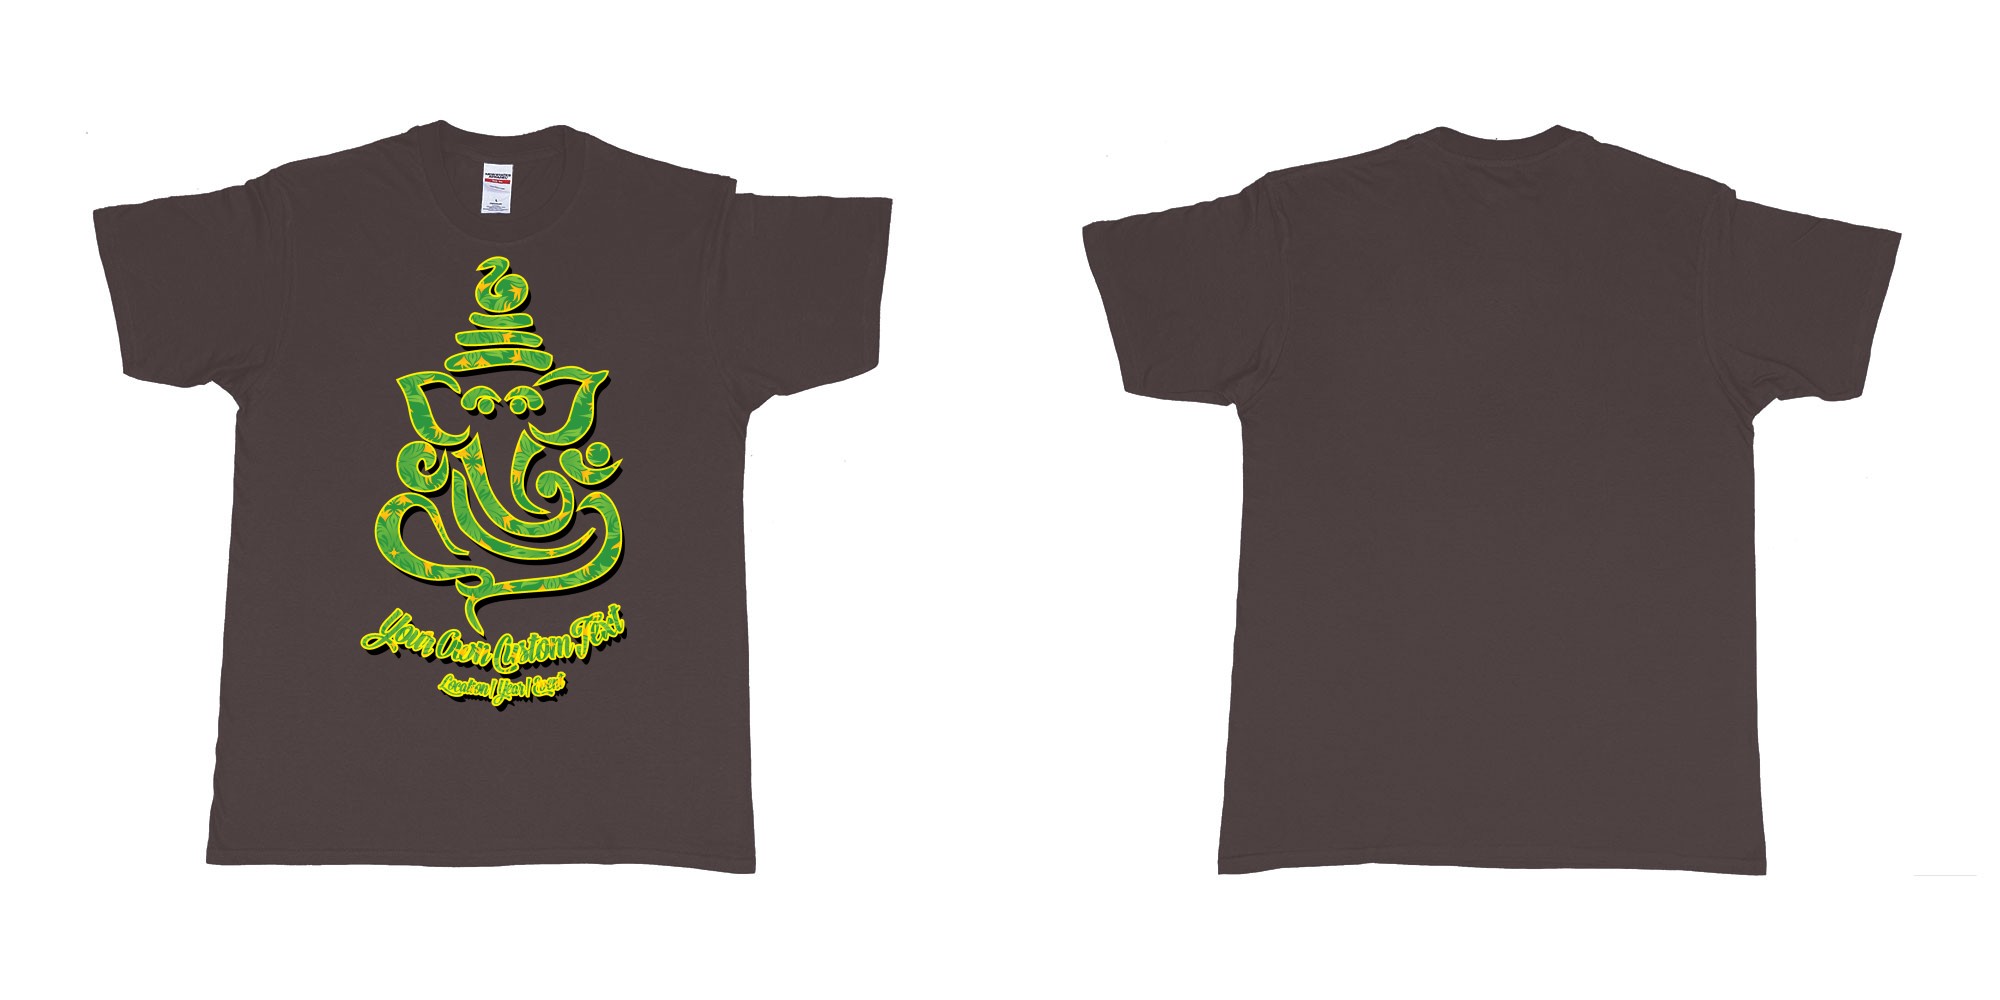 Custom tshirt design ganesh soft jungle yoga customize own design in fabric color dark-chocolate choice your own text made in Bali by The Pirate Way